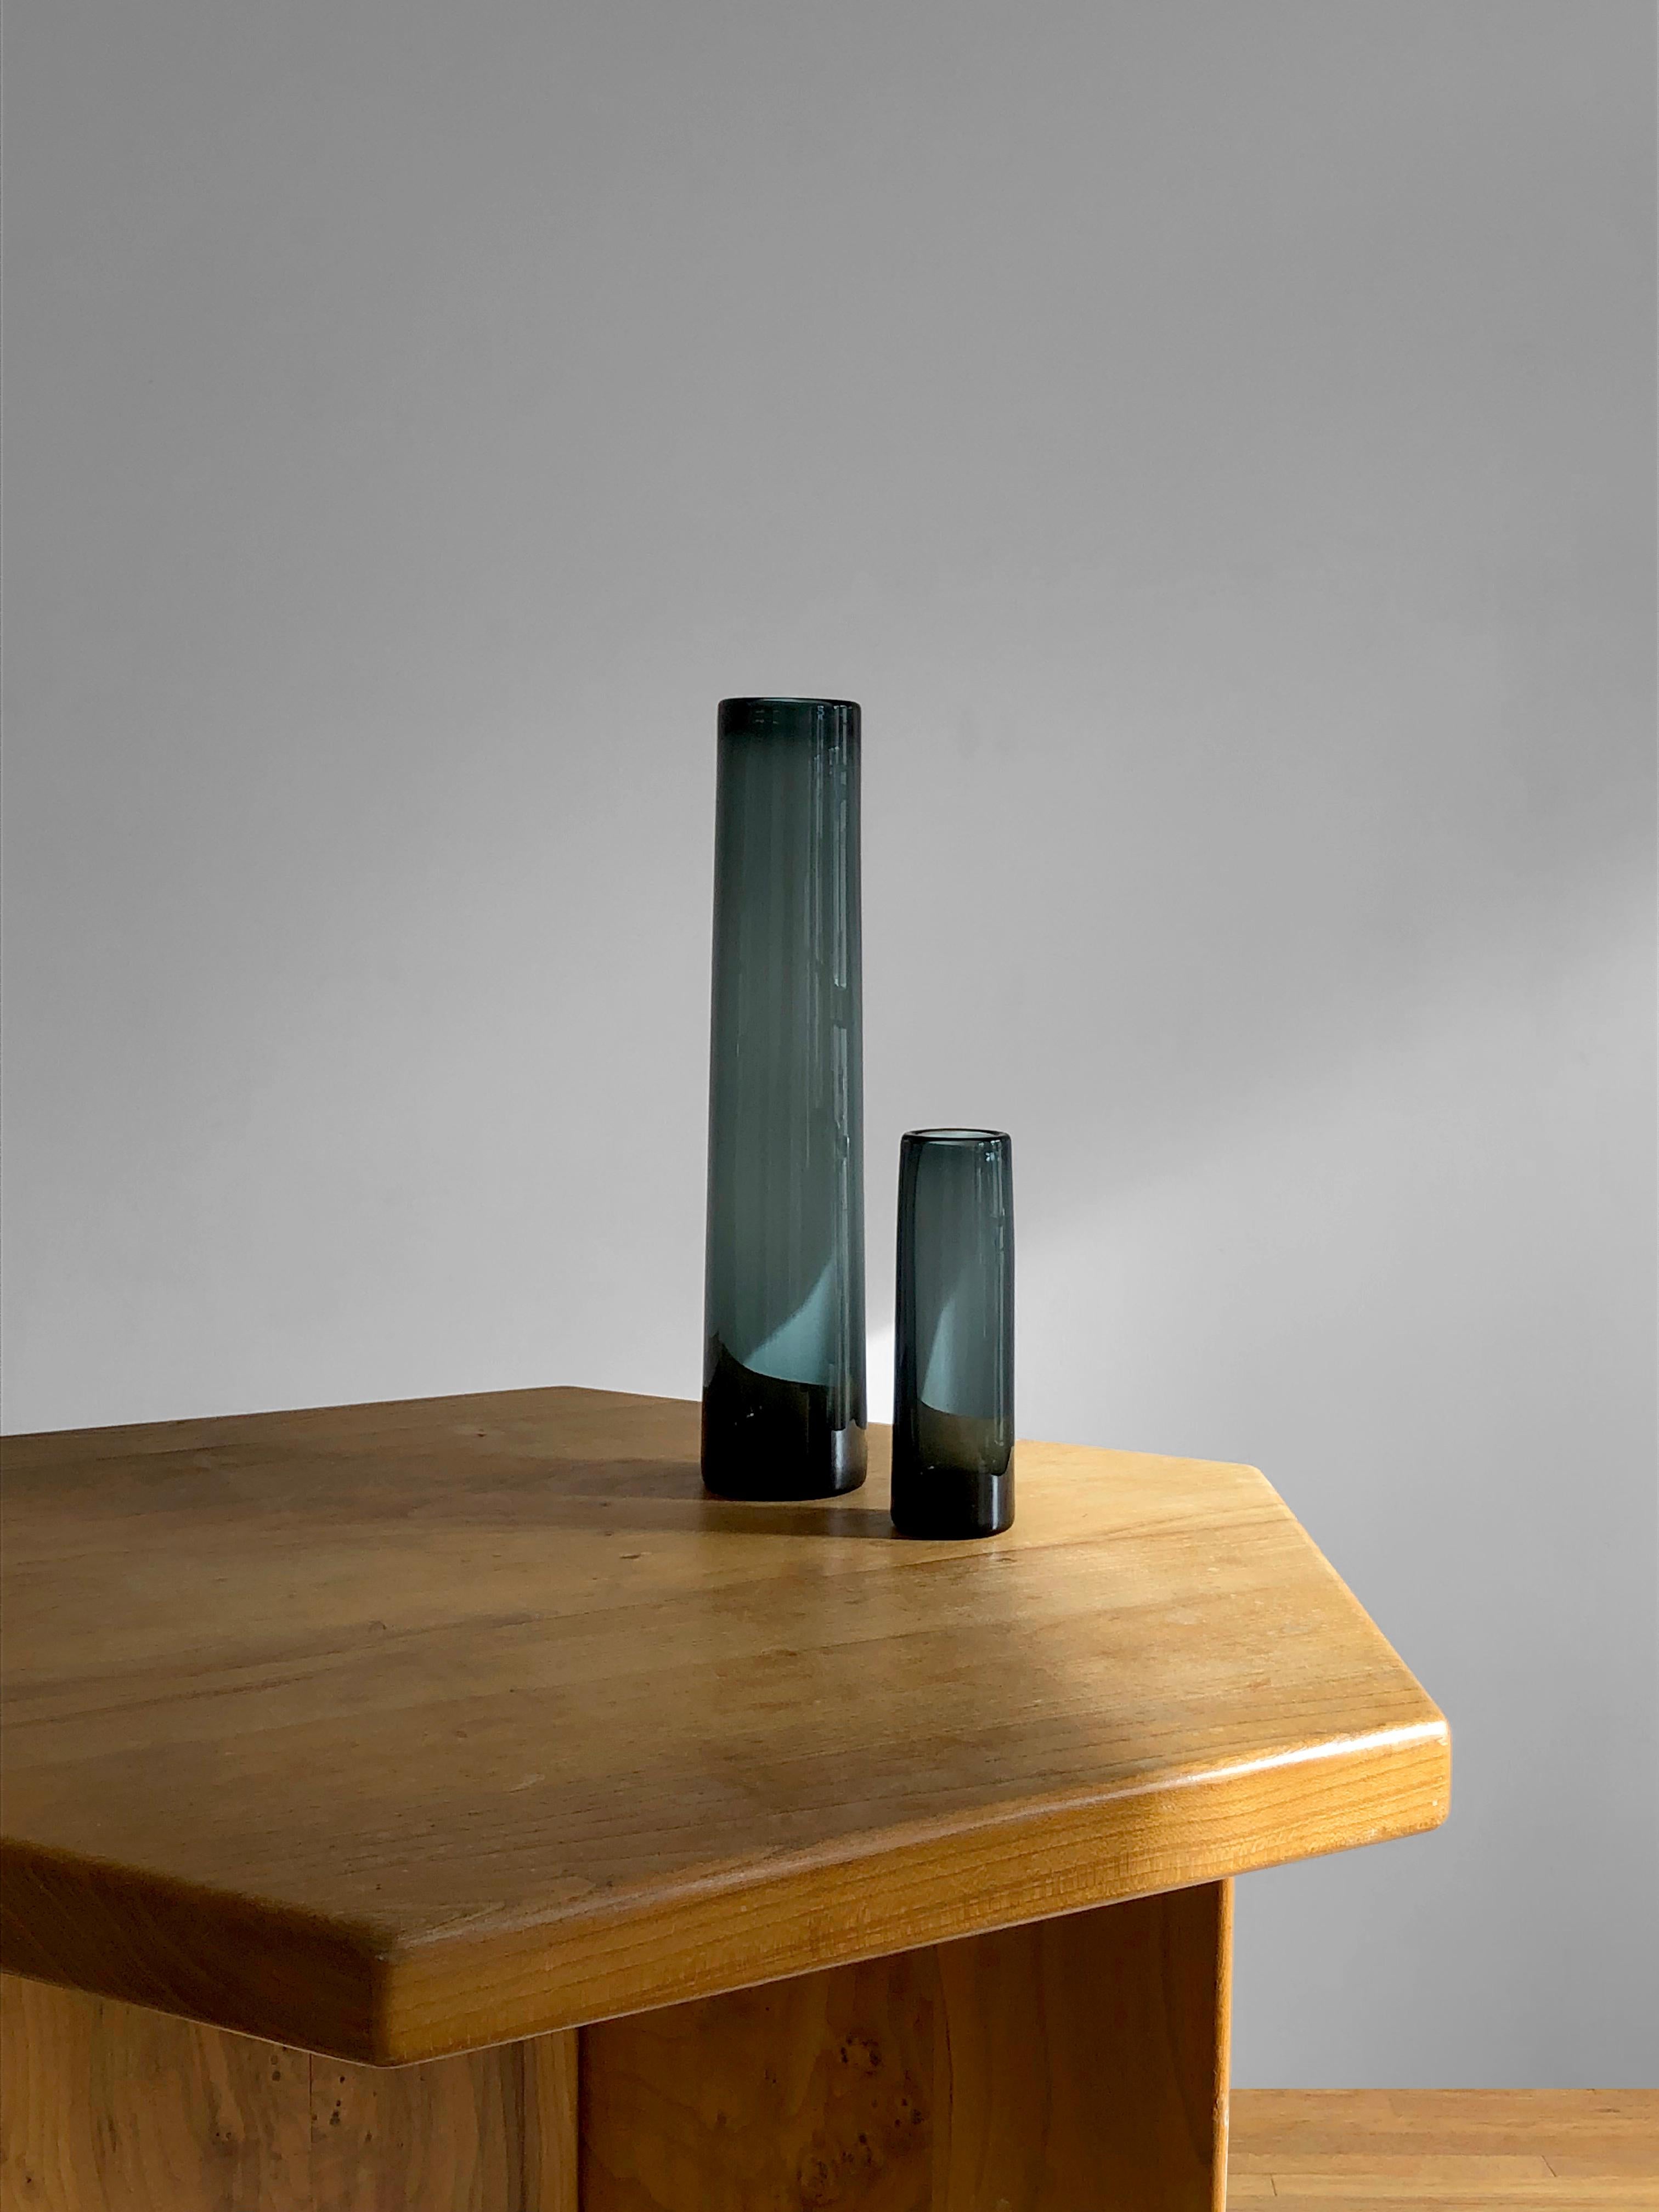 A spectacular pair of asymetrical cylindrical or tube blown vases, Modernist, Forme-Libre, 2 high and low purple blue blown glass vases, both acide signed and dated under the base by Per Lütken, for Holmegaard, Denmark 1958 & 1961.

These 2 vases